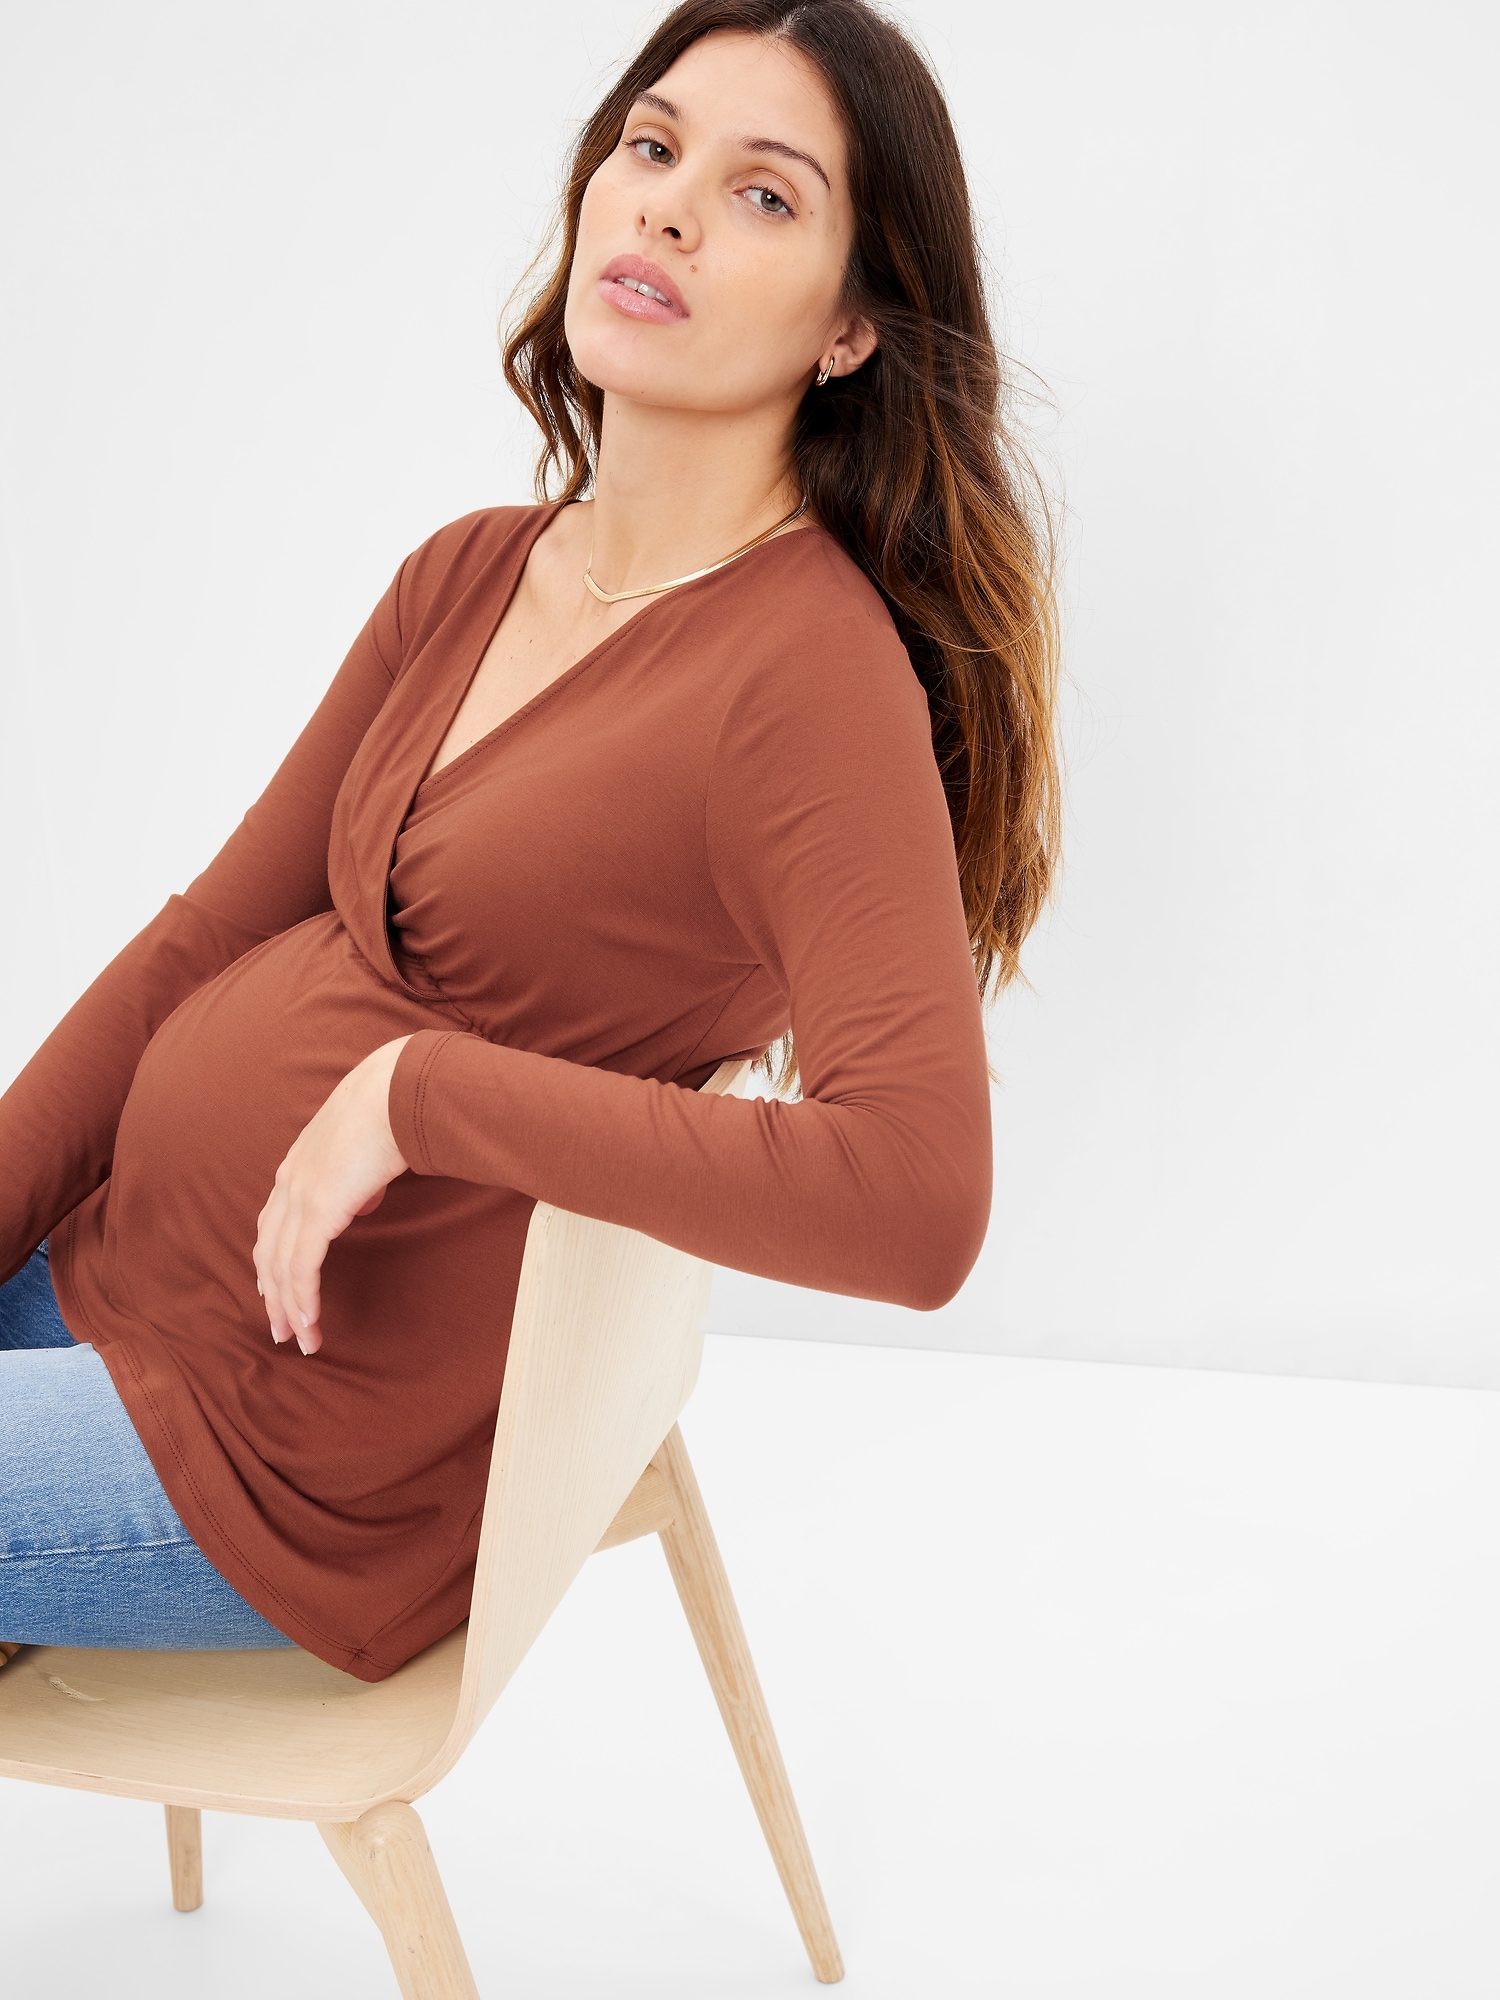 Gap Maternity Collection now in Canada! Classic, cute and comfy fashion for  your bump